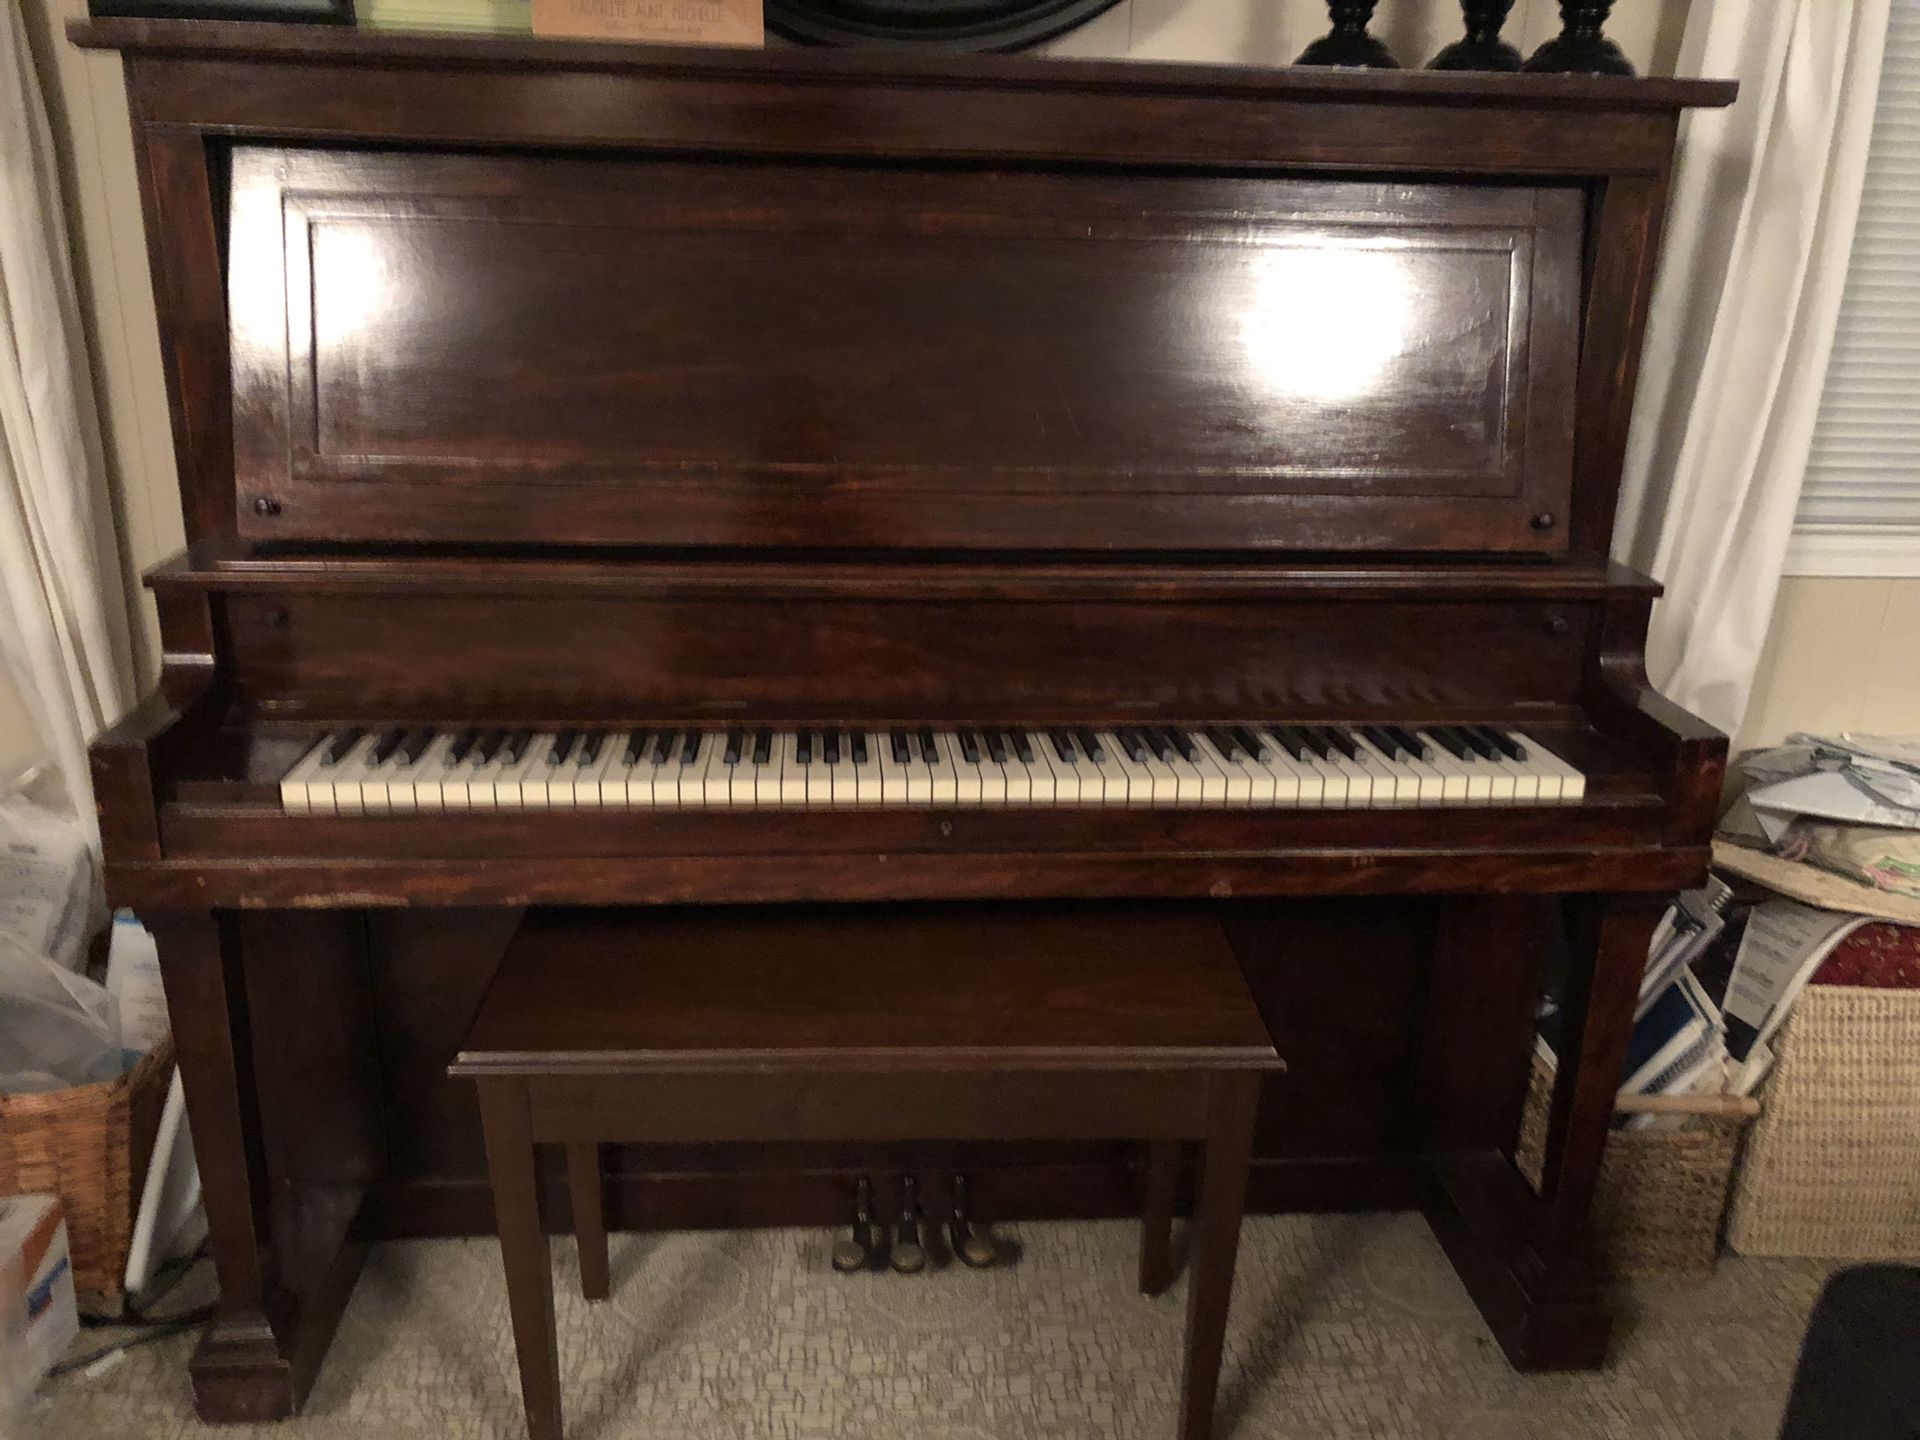 Beautiful upright piano for sale